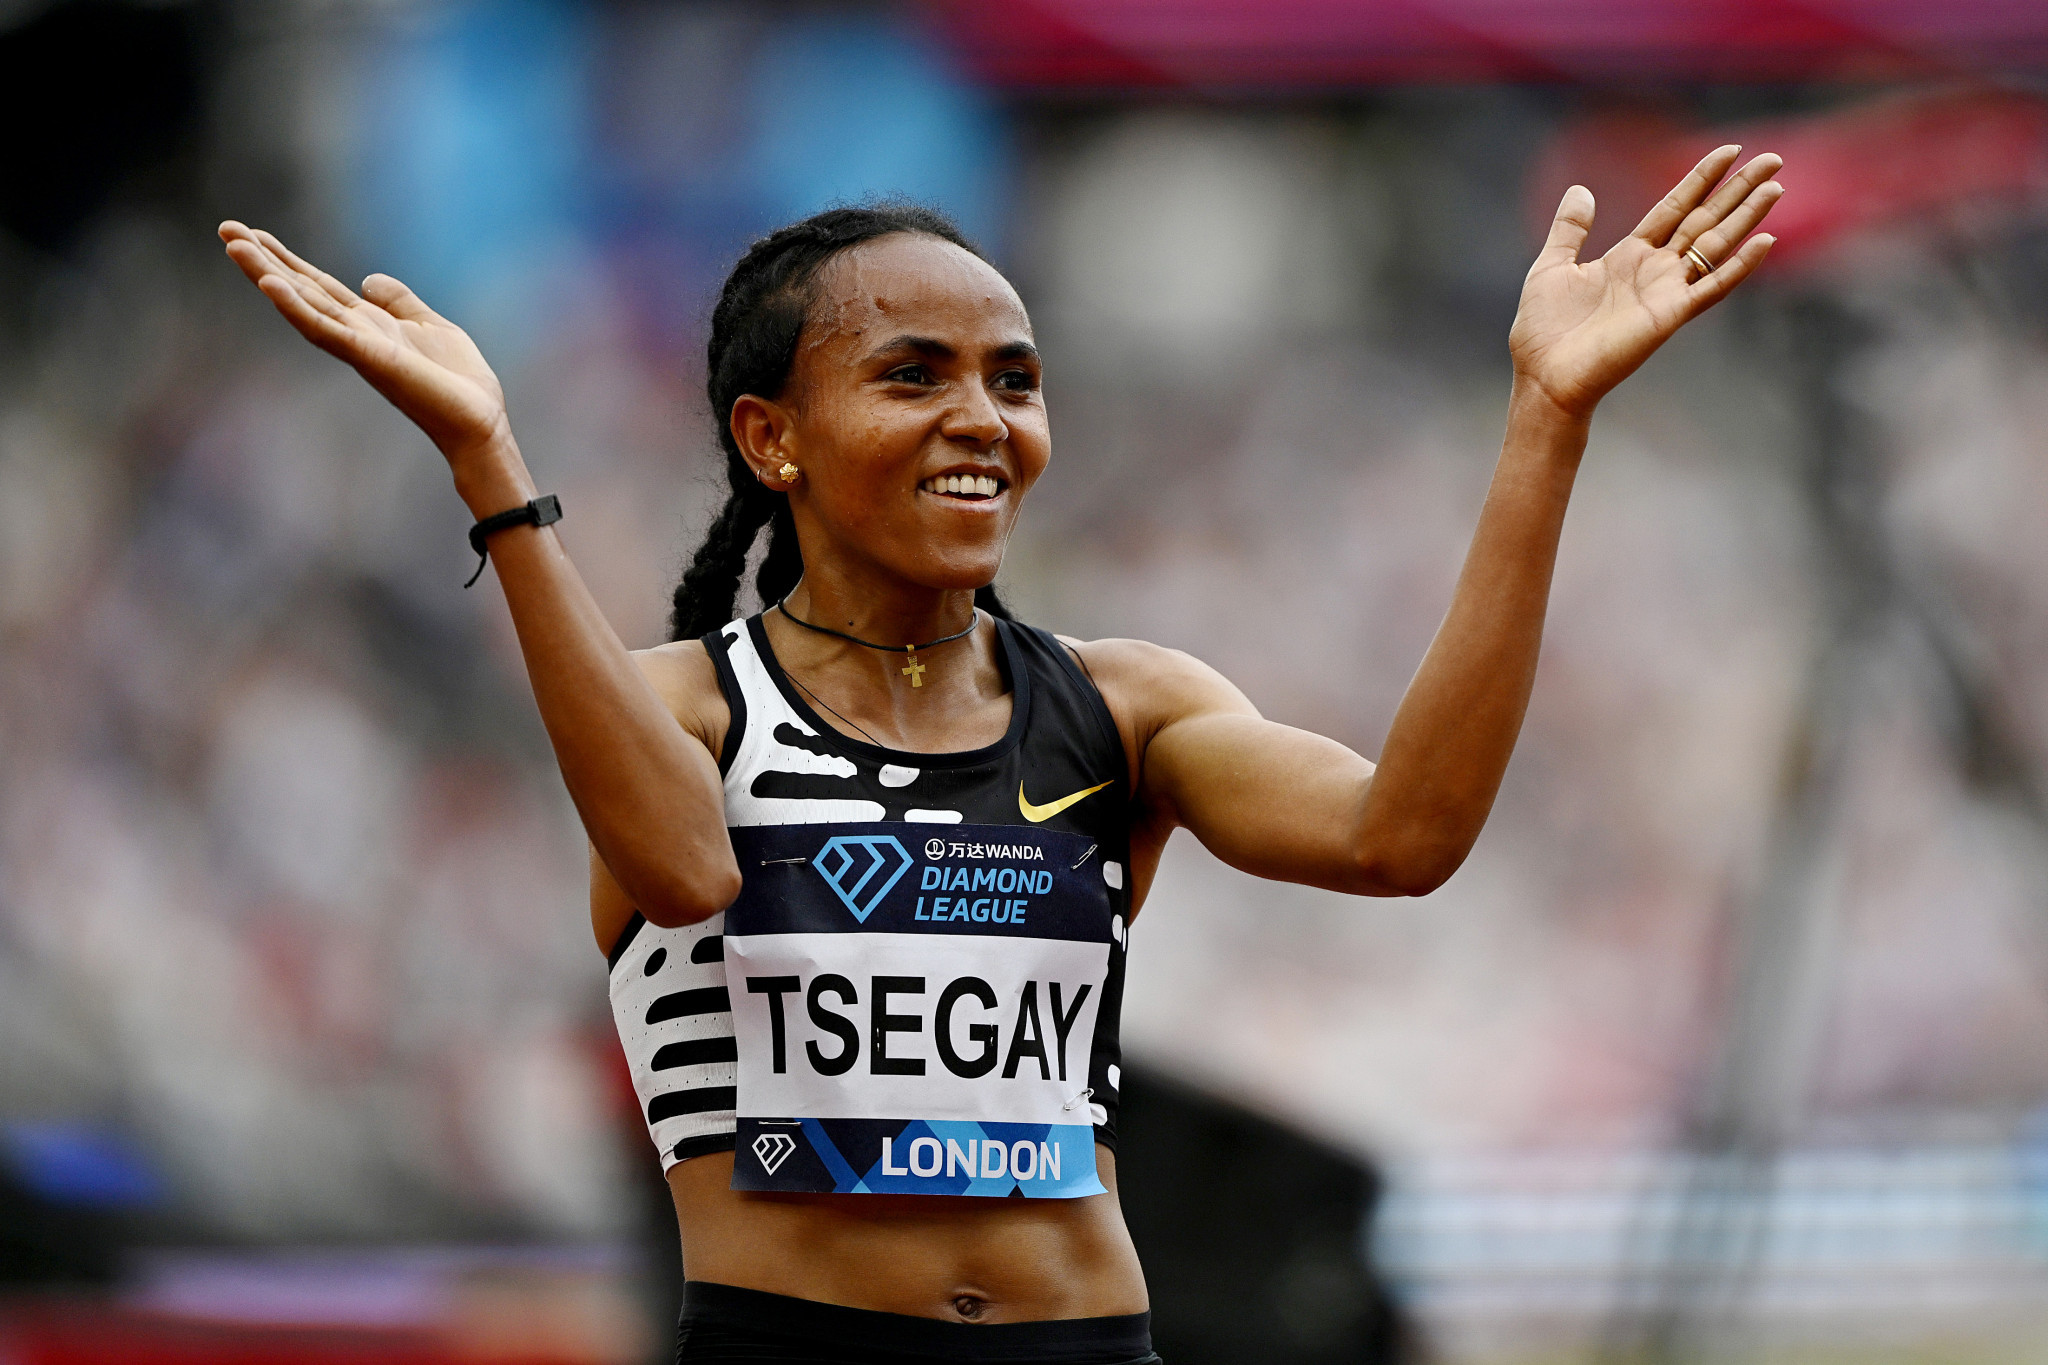 The women's 5,000 metres, won by Gudaf Tsegay, also provided a meeting record in London ©Getty Images